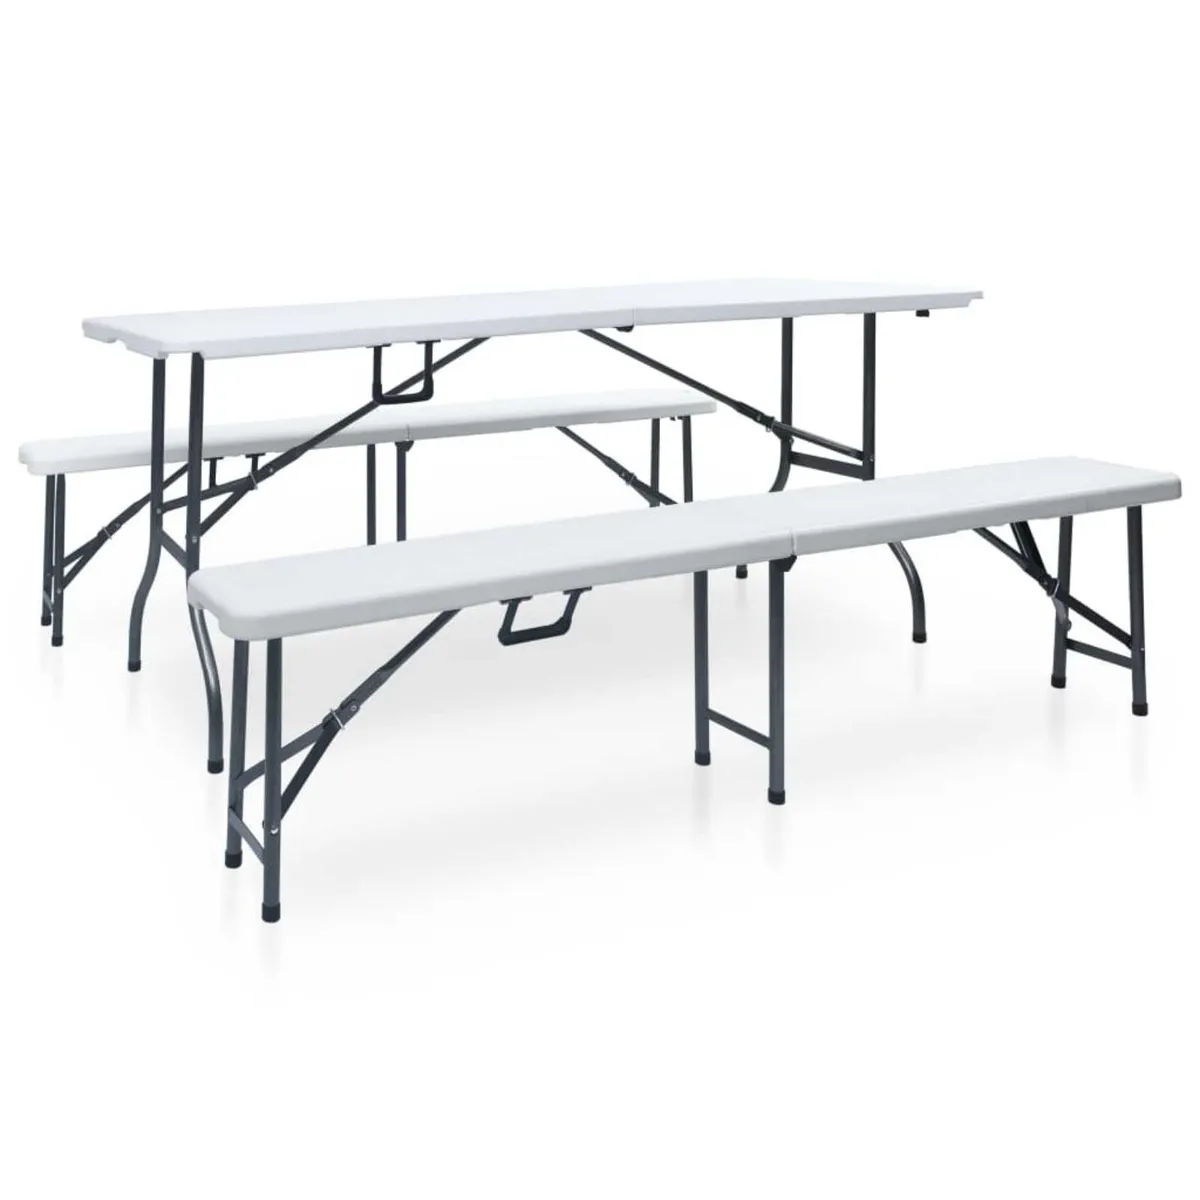 Folding Garden Table with 2 Benches 180 cm Steel a